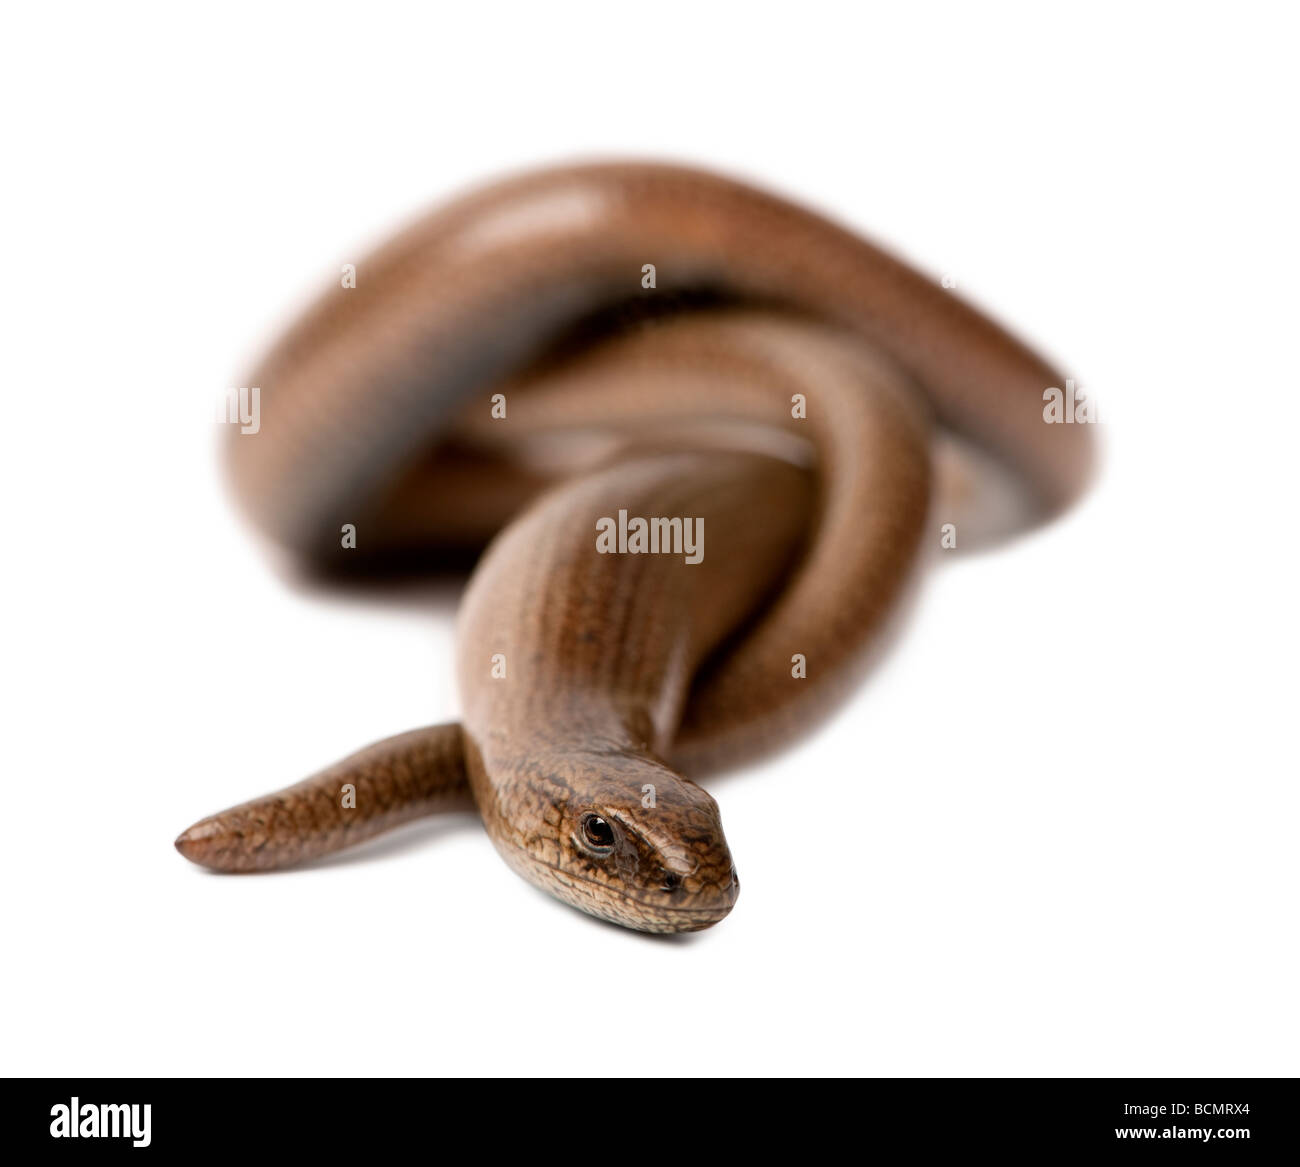 Front view of a slowworm, Anguis fragilis, in front of a white background, studio shot Stock Photo